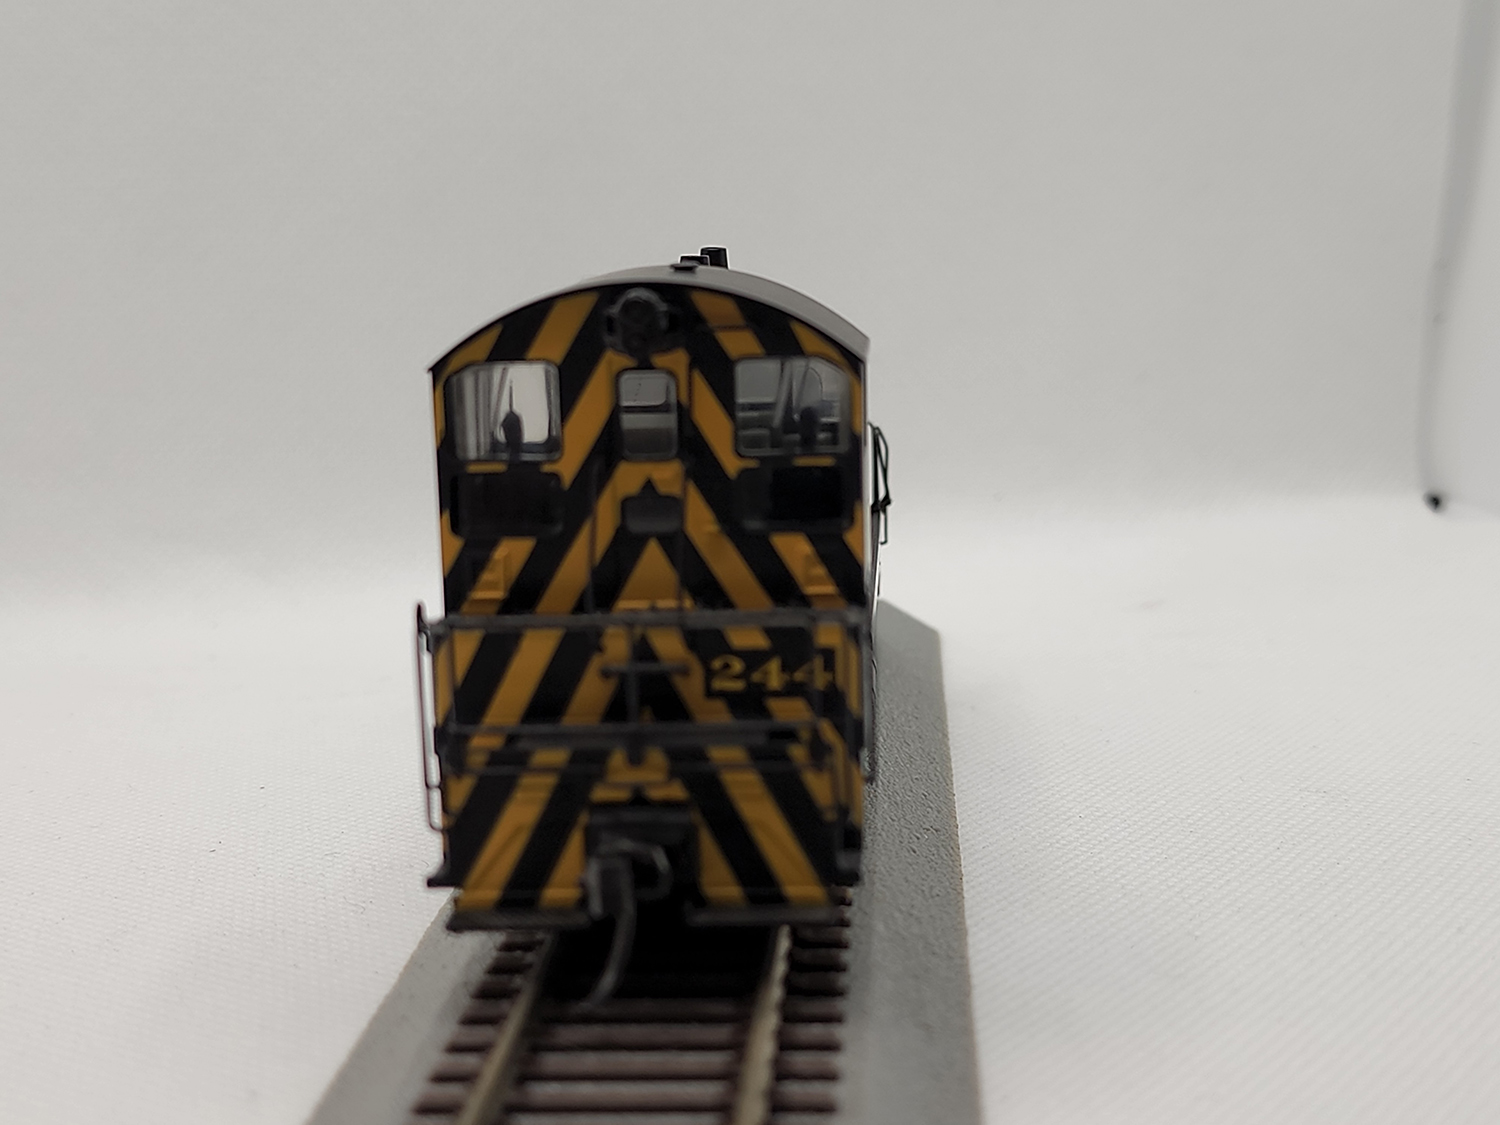 8th view of the Life-Like Nickel Plate Road SW9 Diesel Locomotive #244 in my HO-scale Collection